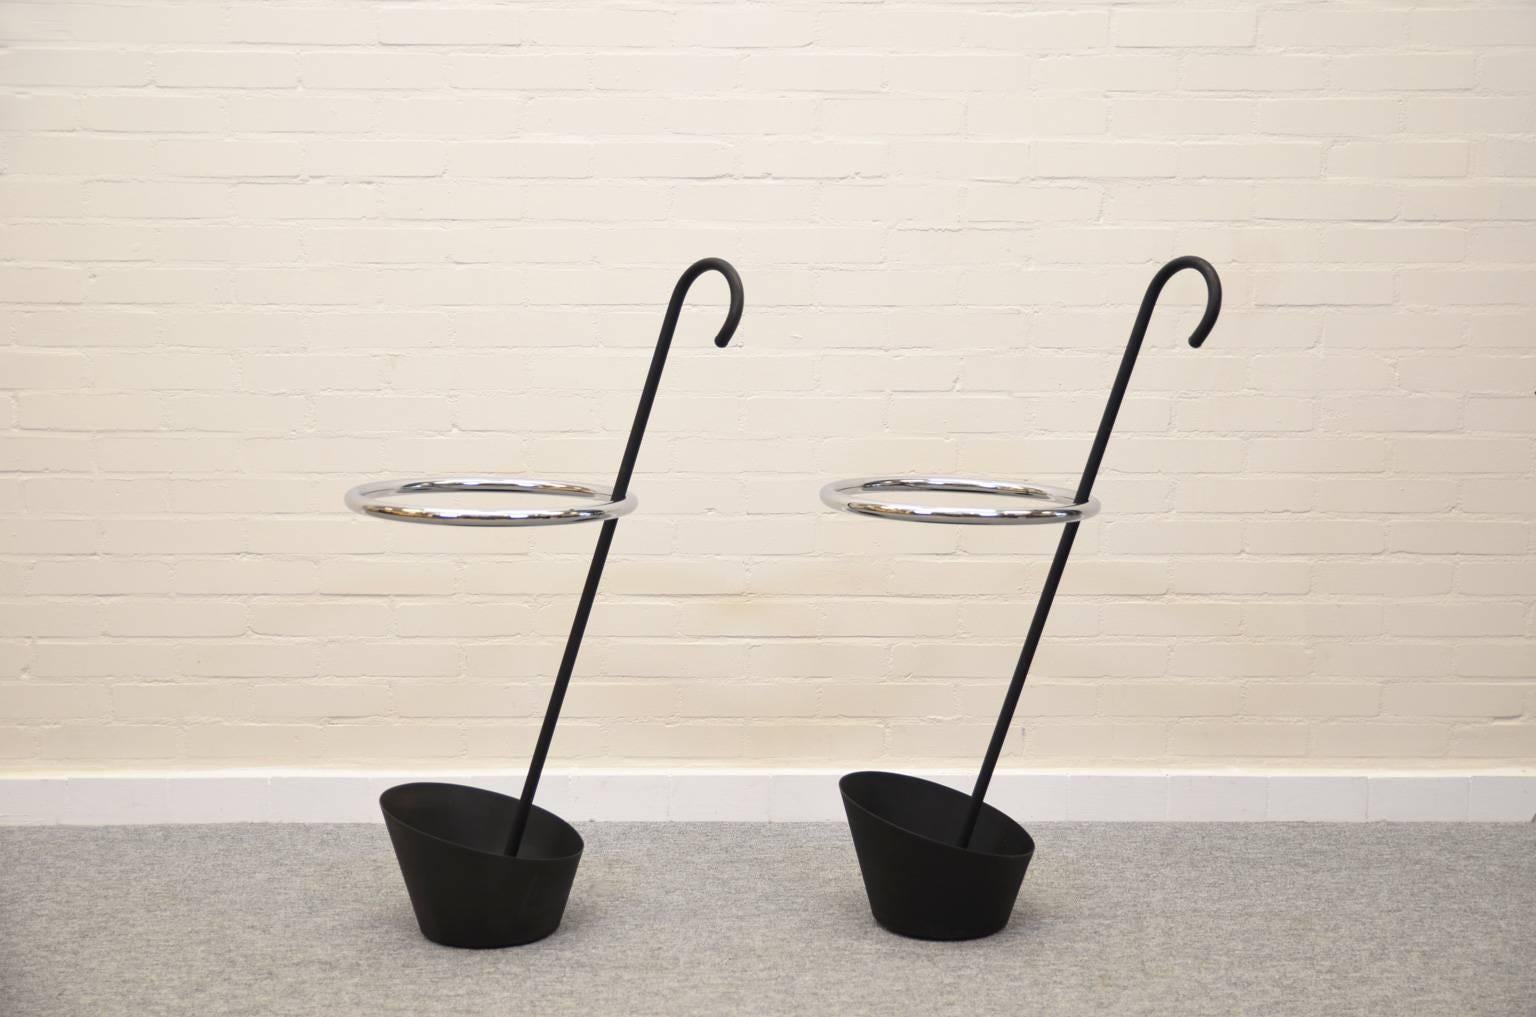 The perspective and balance of this umbrella stand provide an exciting and humorous design; a perfect combination of form and function.
 